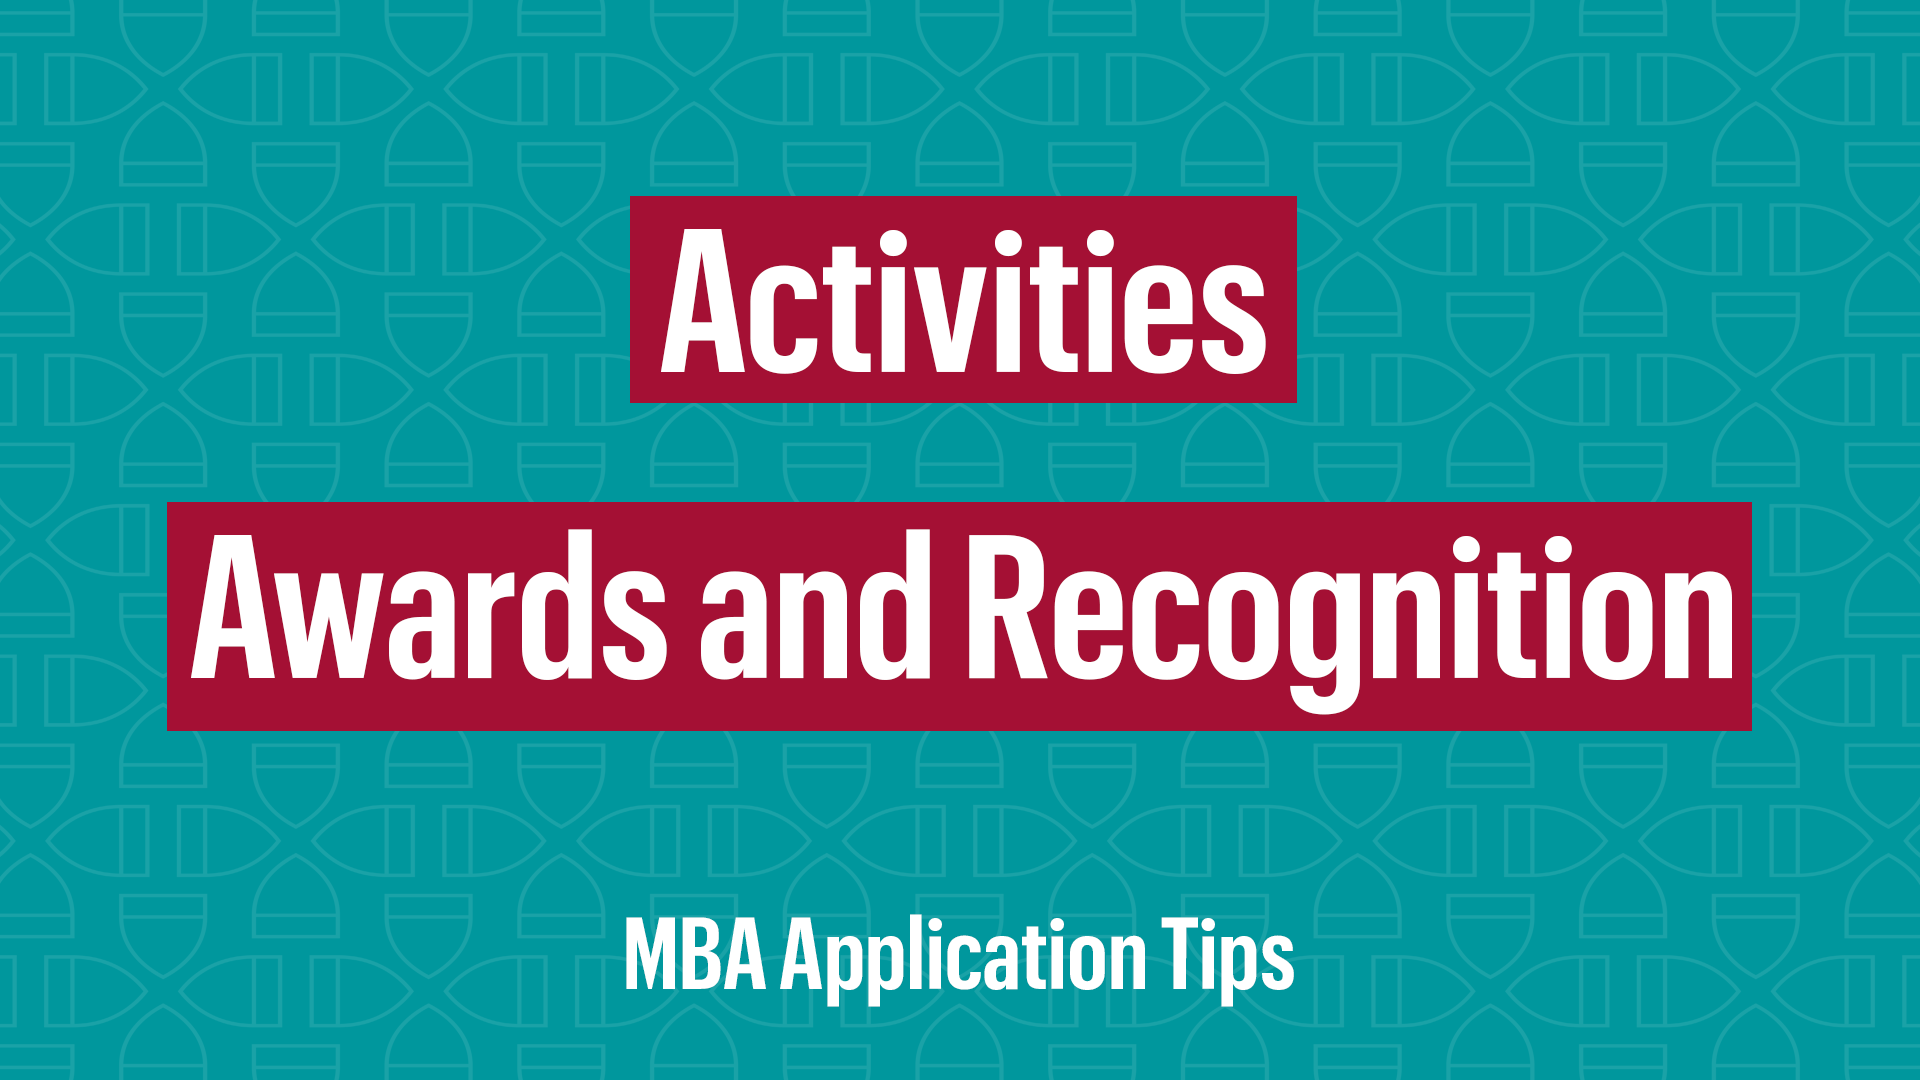 Extracurricular Activities and Awards Tips